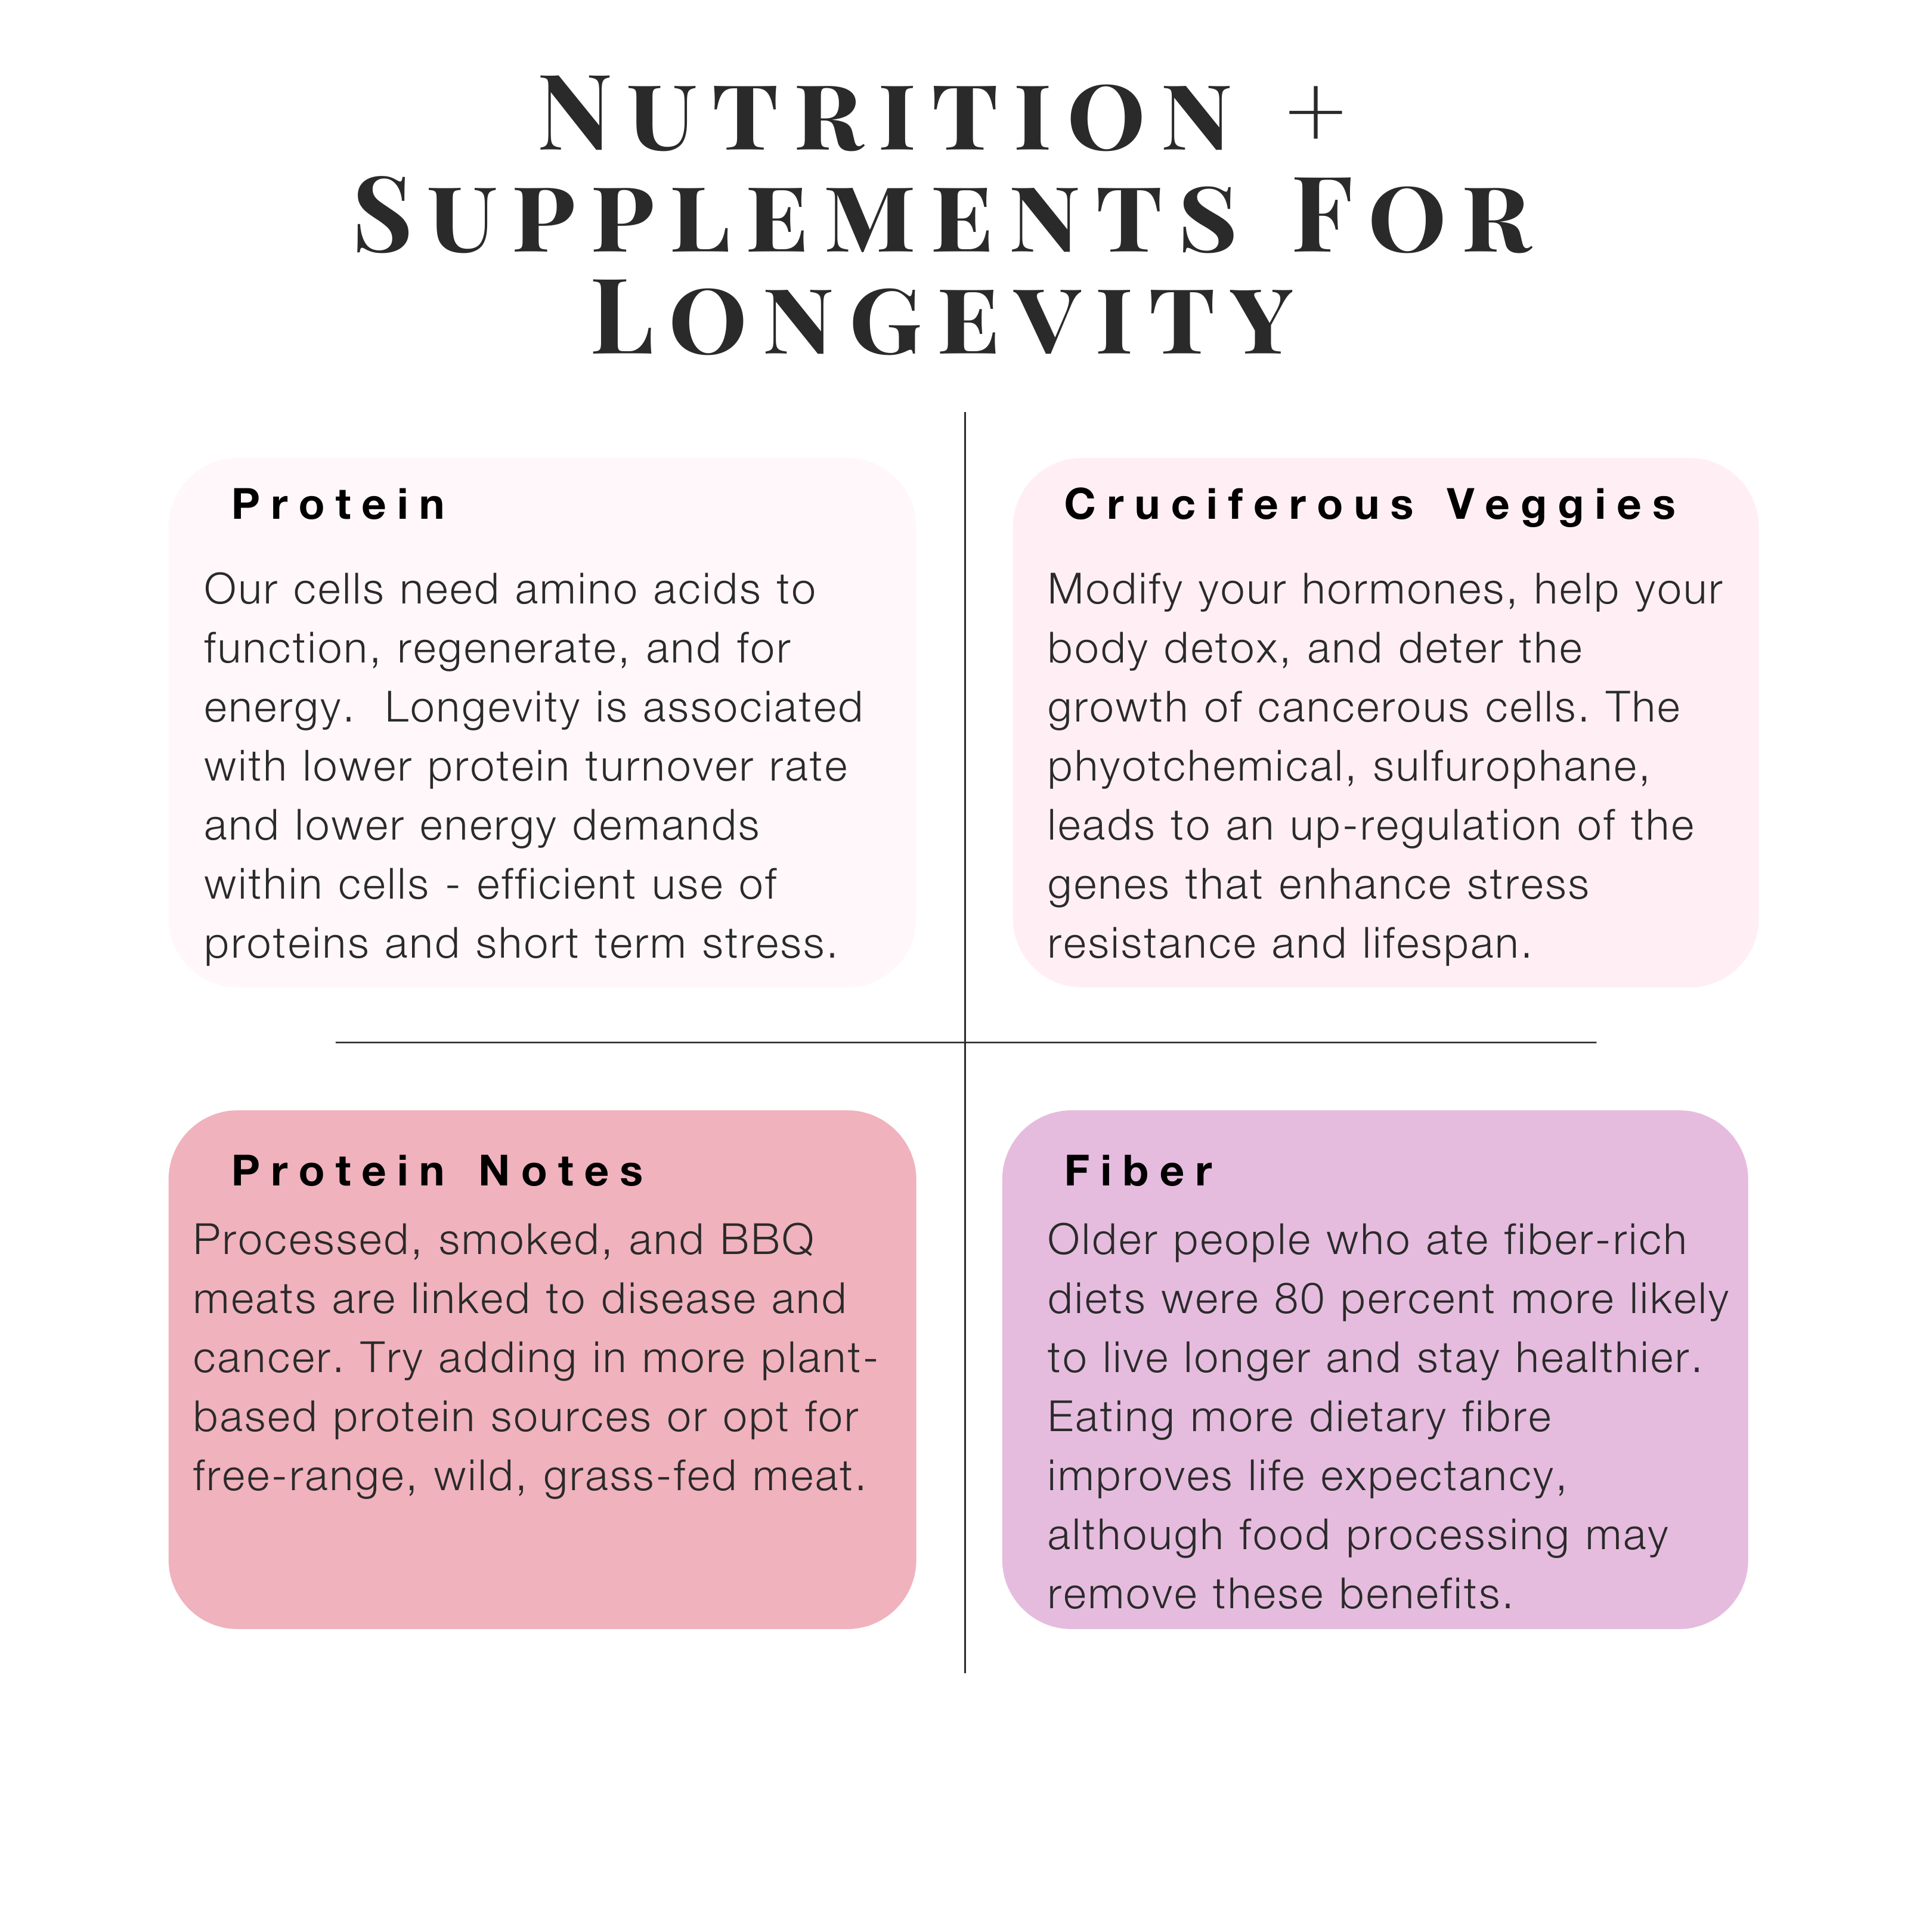 Protein and fiber for longevity